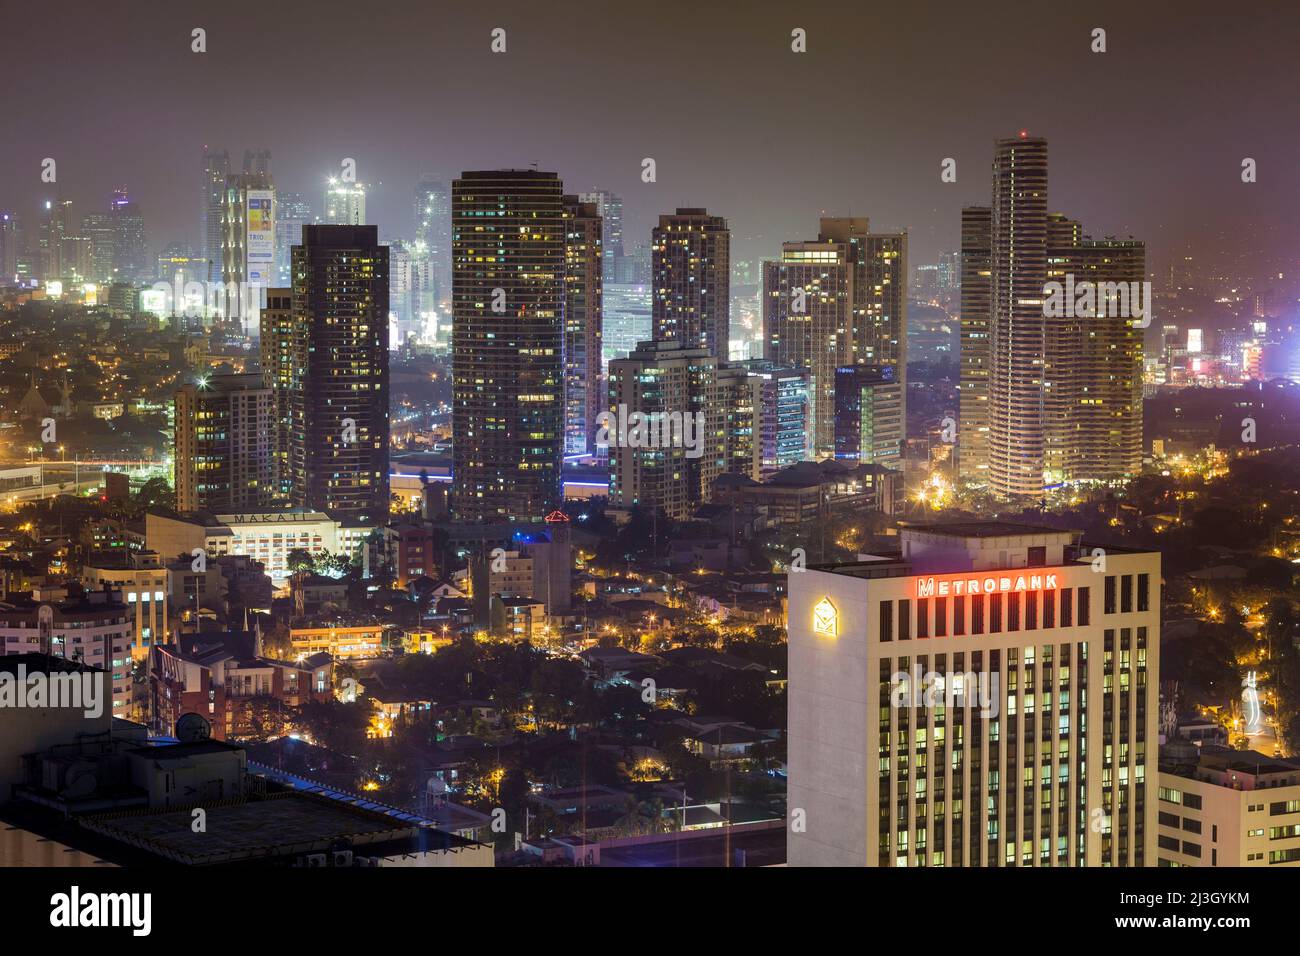 Philippines, Metro Manila, Makati District, elevated view of skyscrapers and Metrobank building at night, view from City Bank tower Stock Photo